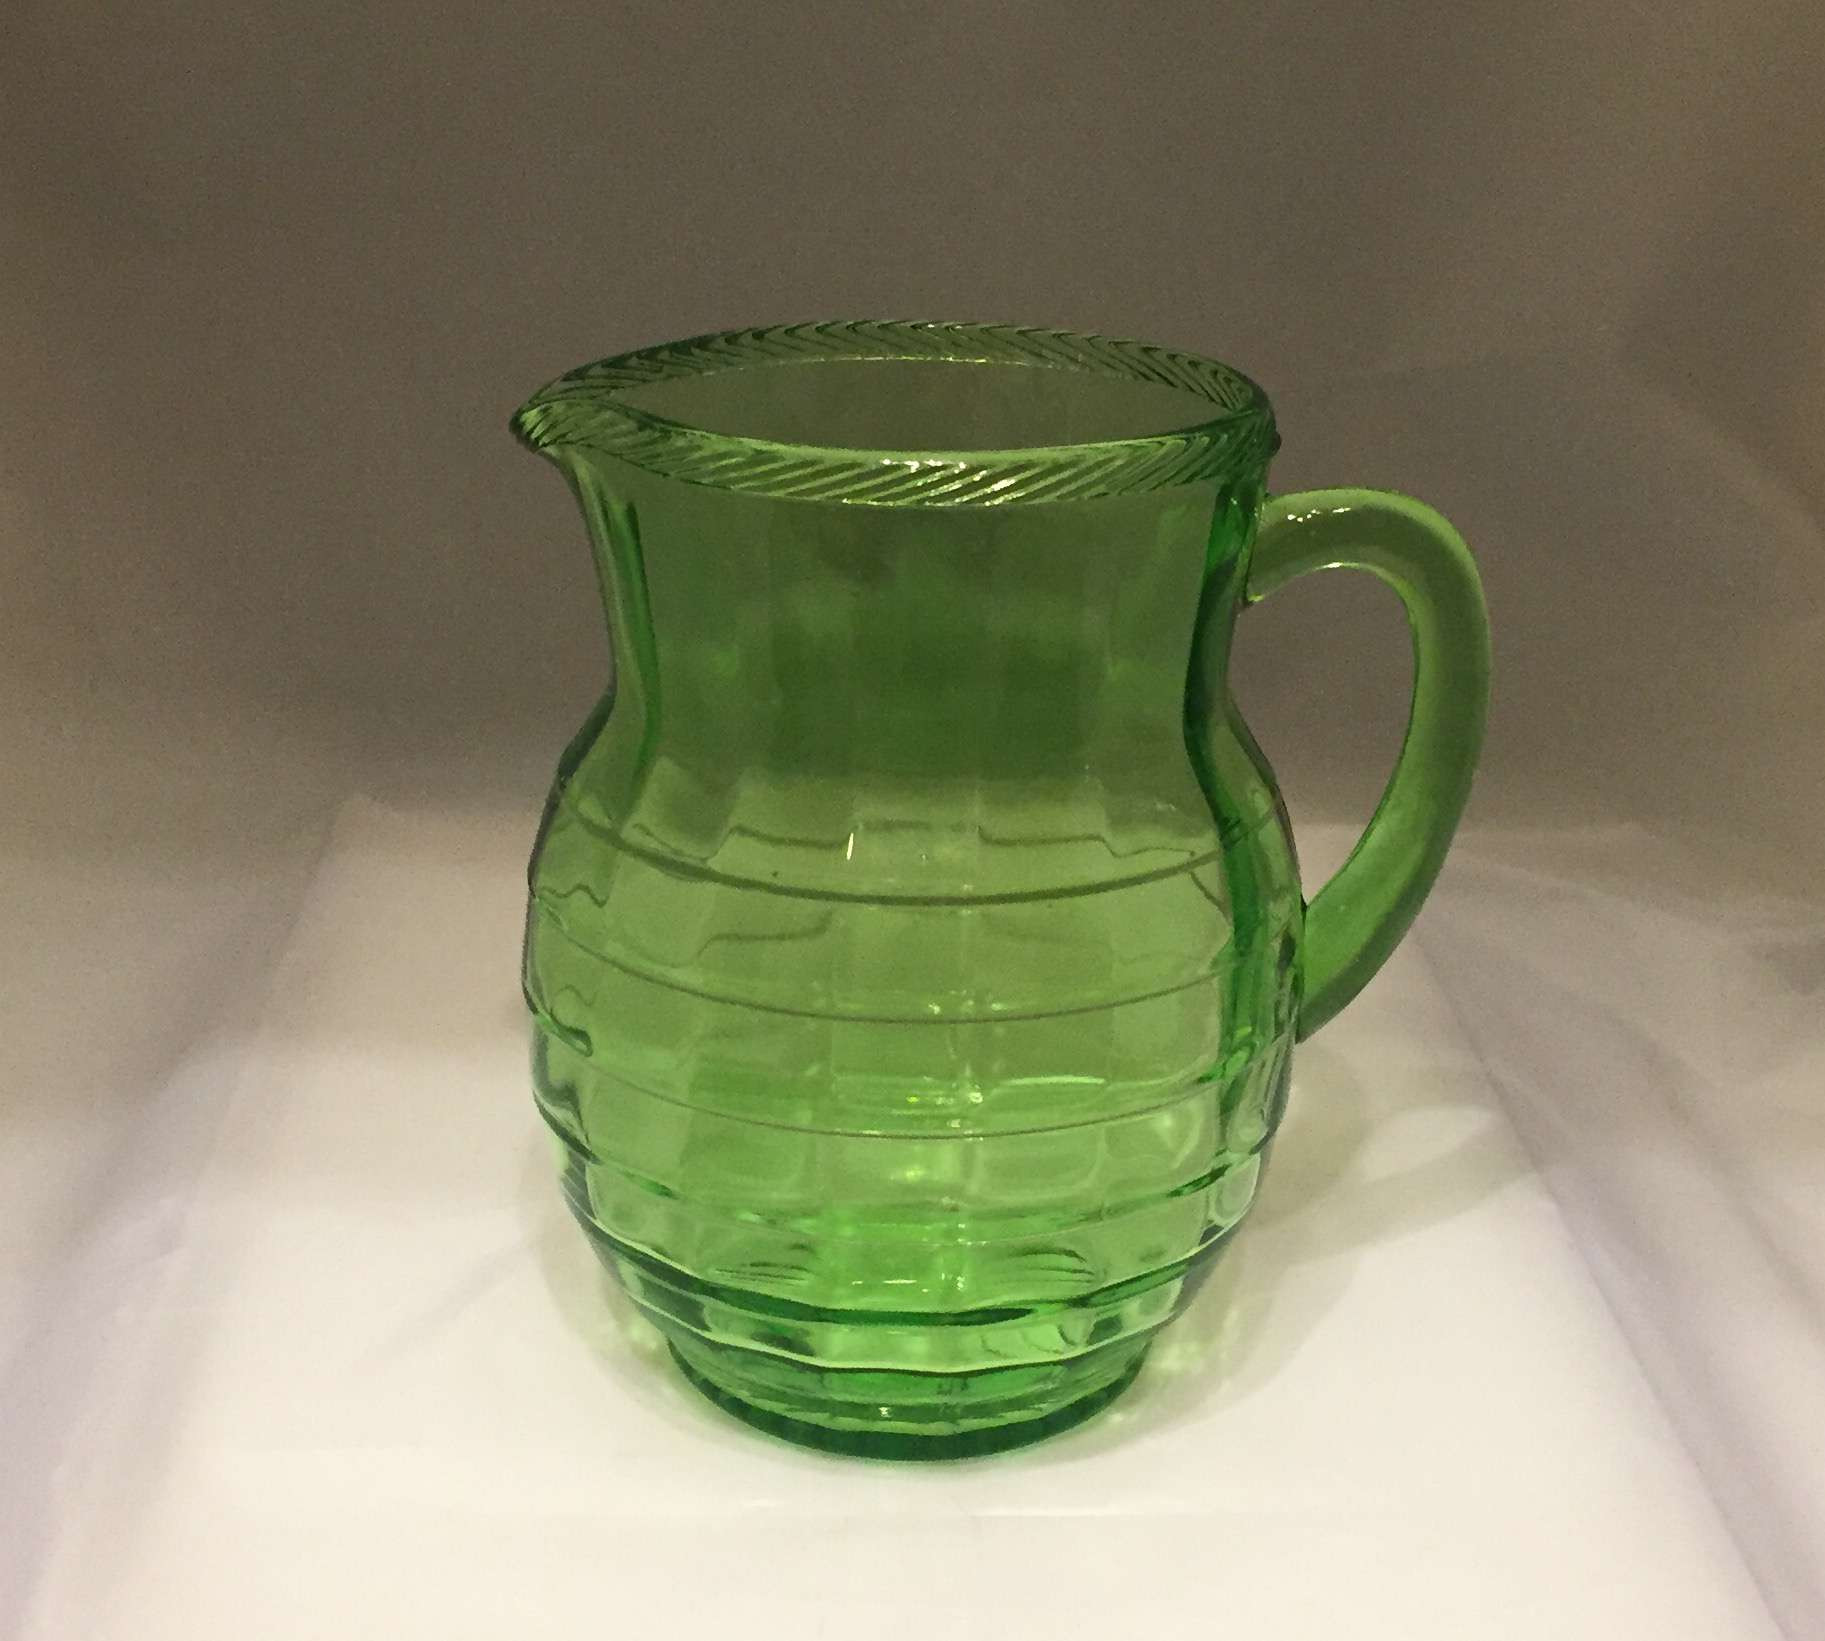 Large Crackle Glass Vase Of Depression Glass Price Guide and Pattern Identification for Blockpitcher 5786c8e35f9b5831b54ecdb1